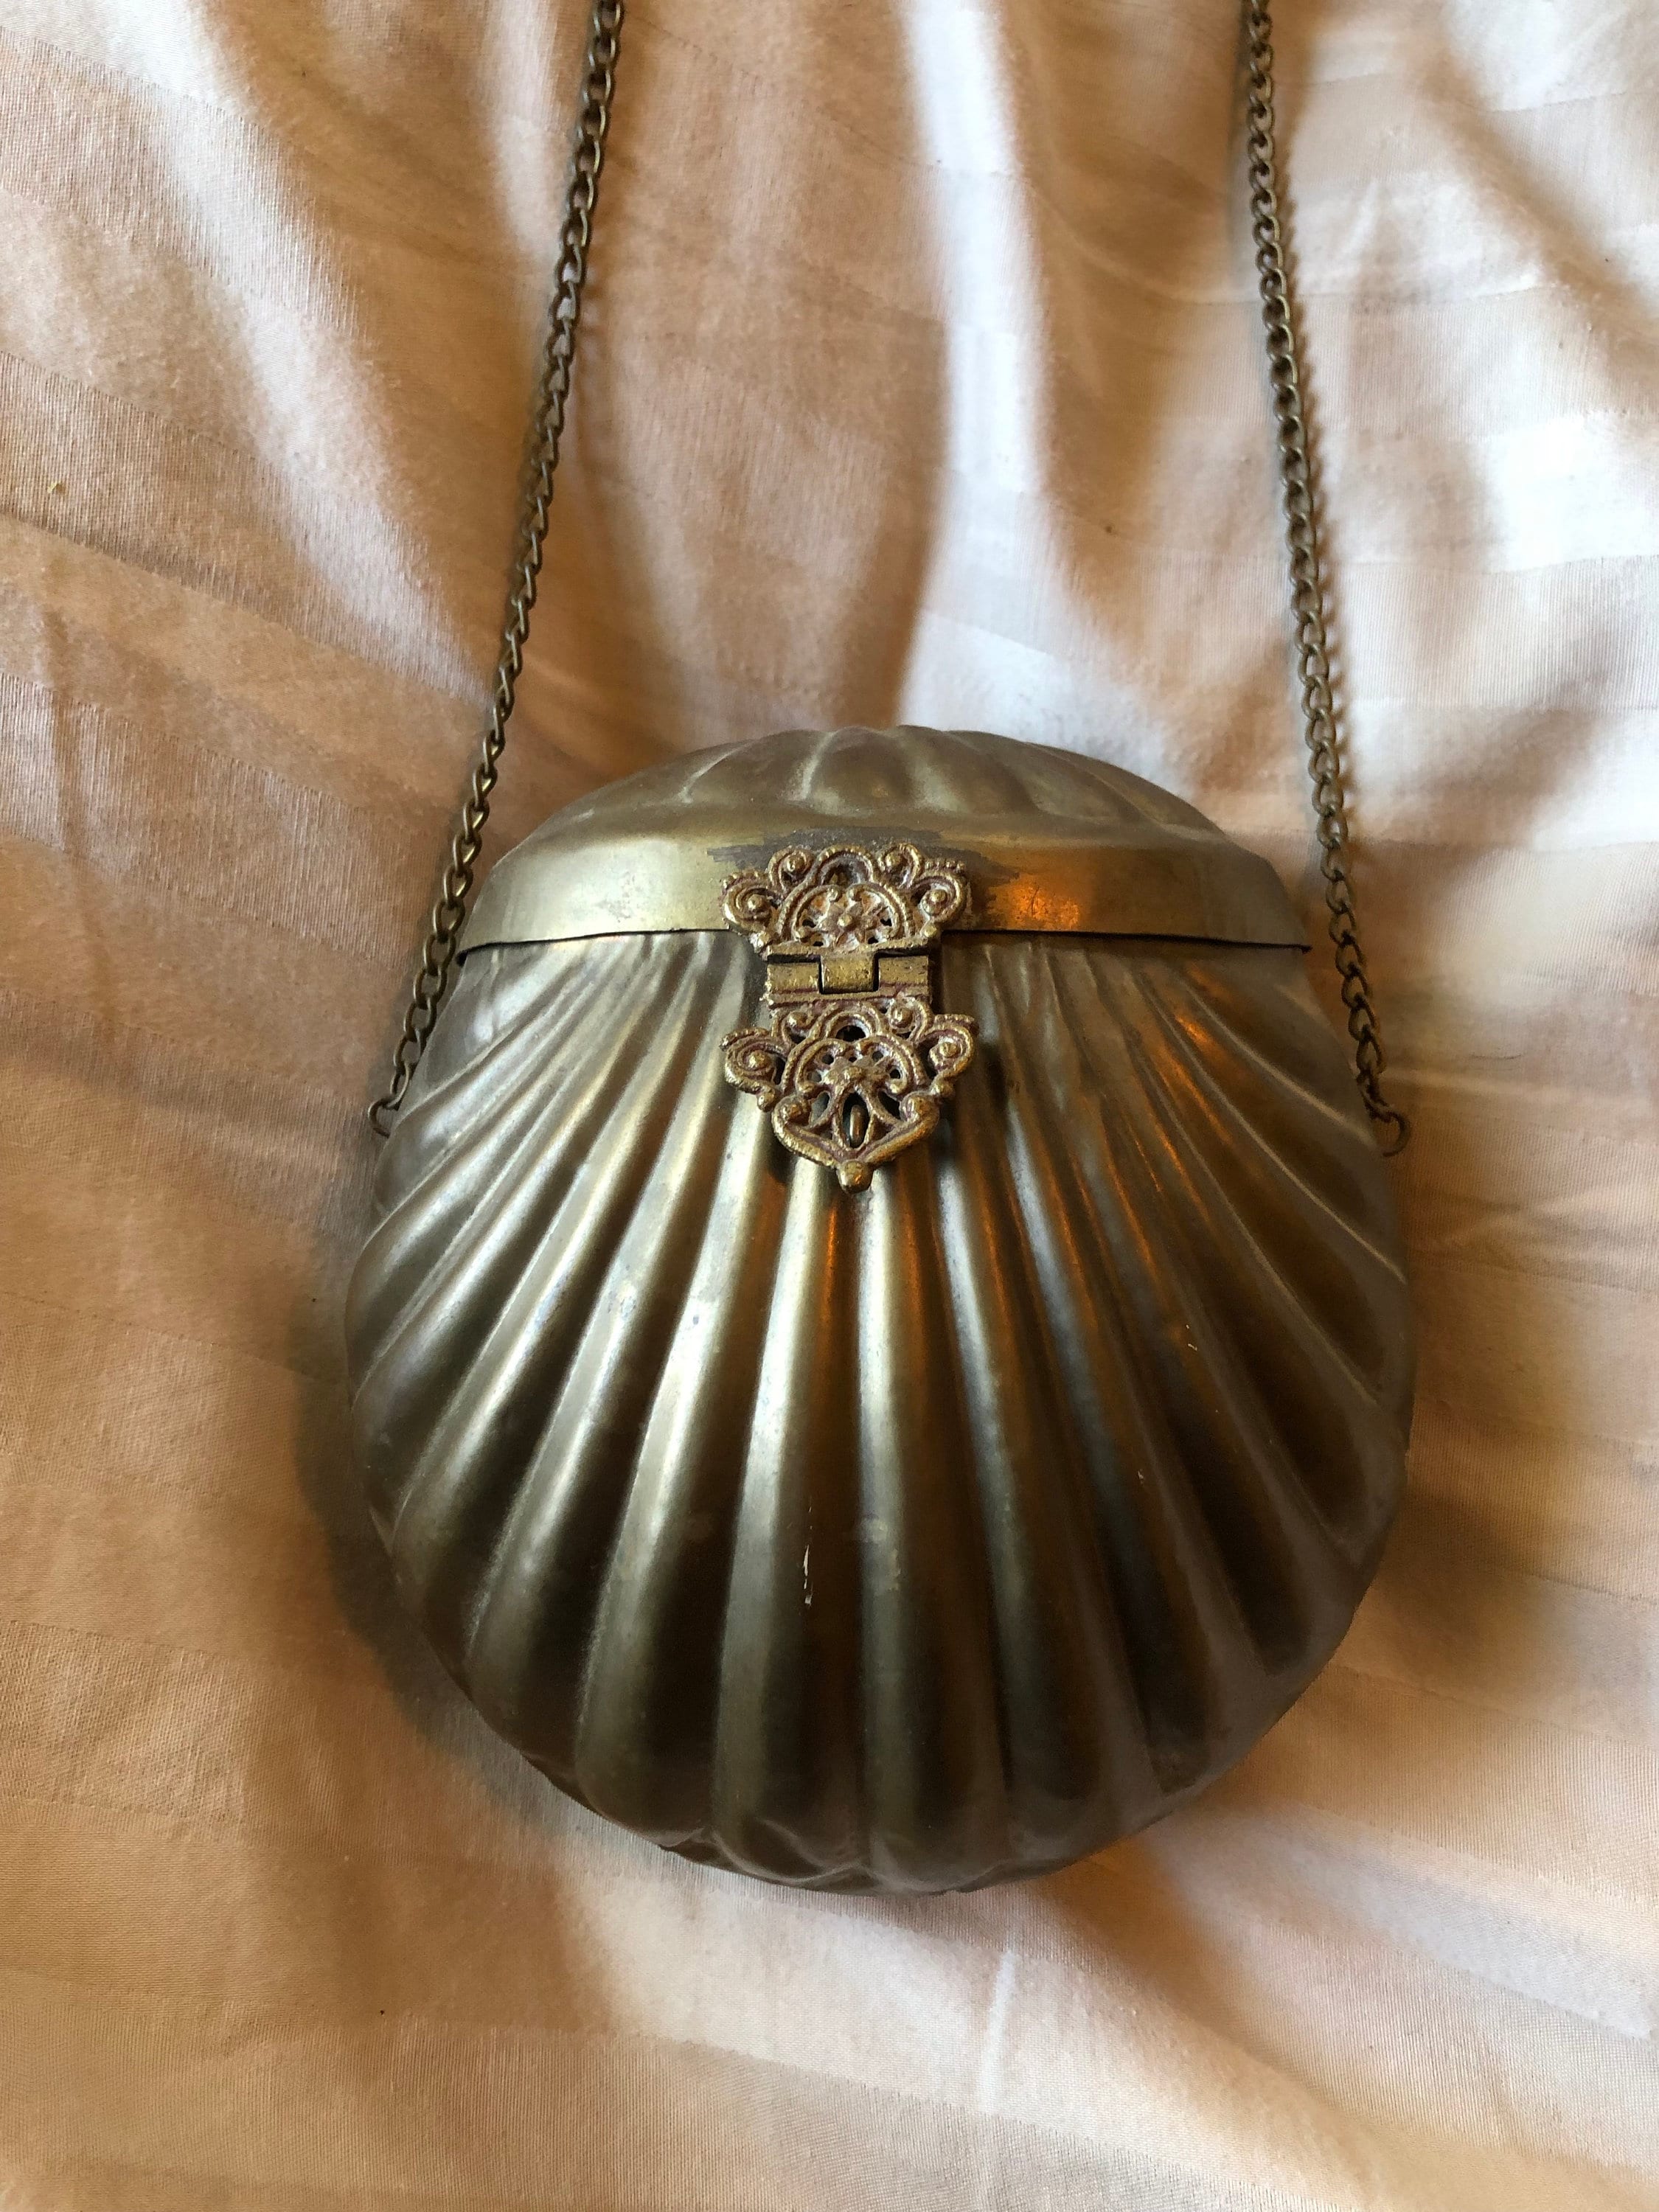 Antique Brass Clamshell Purse Lined With Royal Purple Velvet. -  Canada